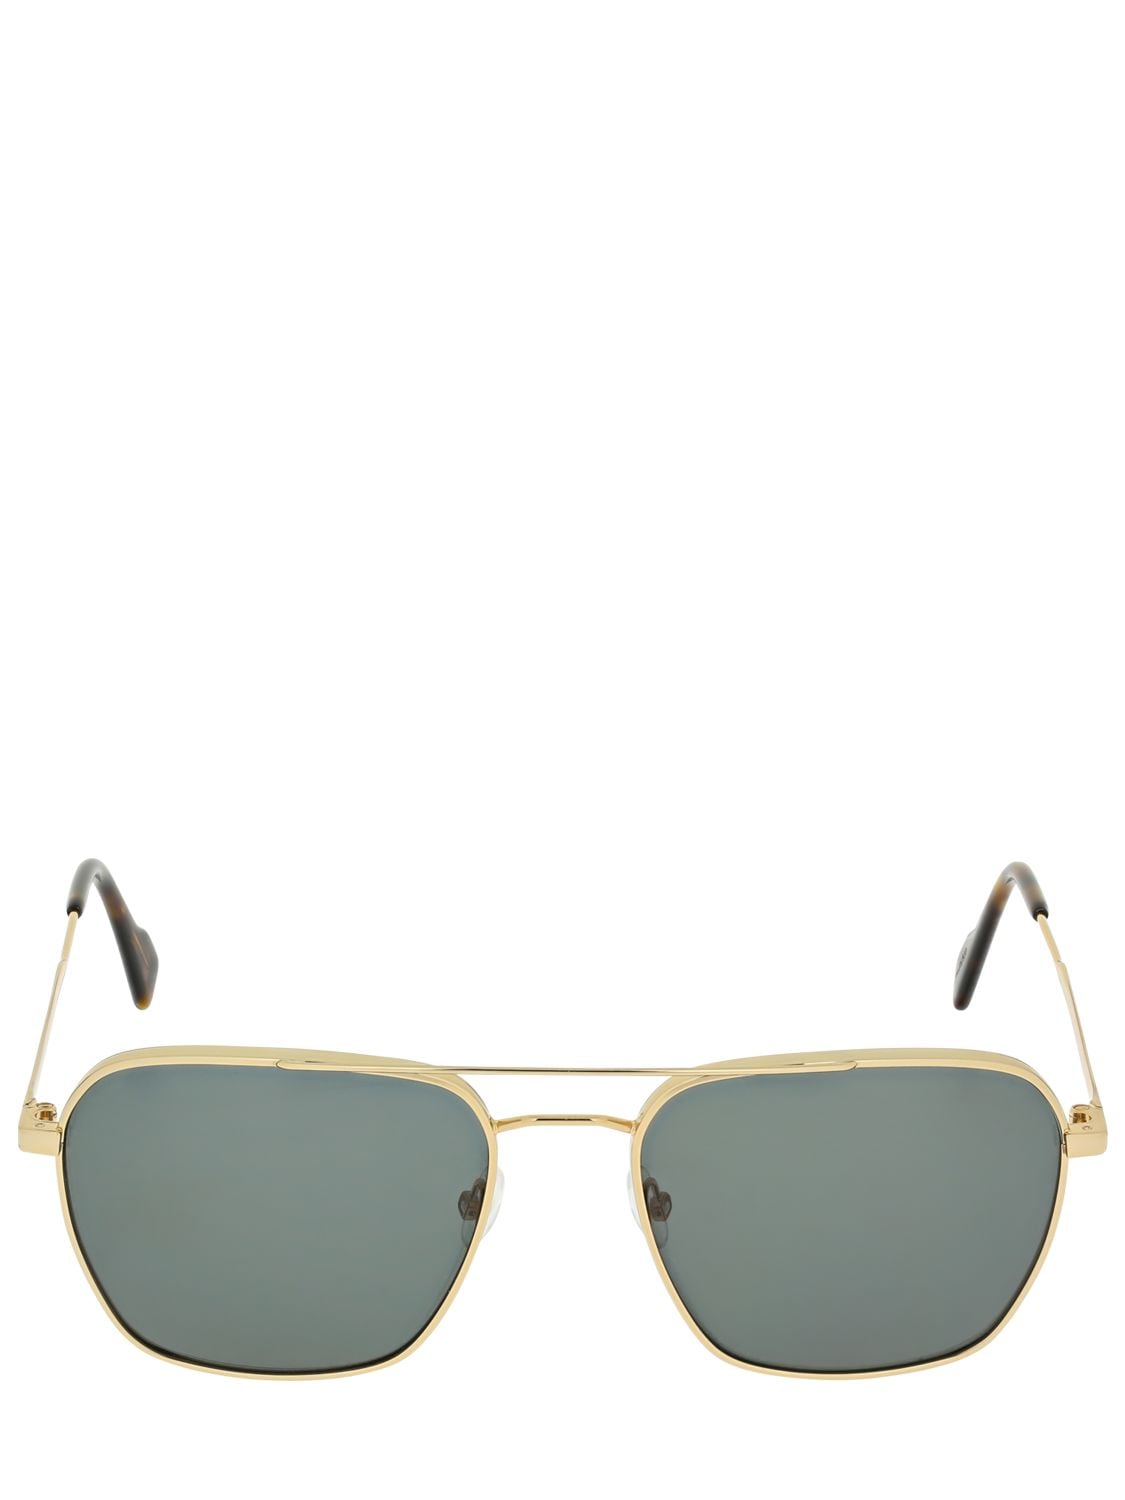 Andy Wolf Damian Squared Metal Sunglasses In Gold,green